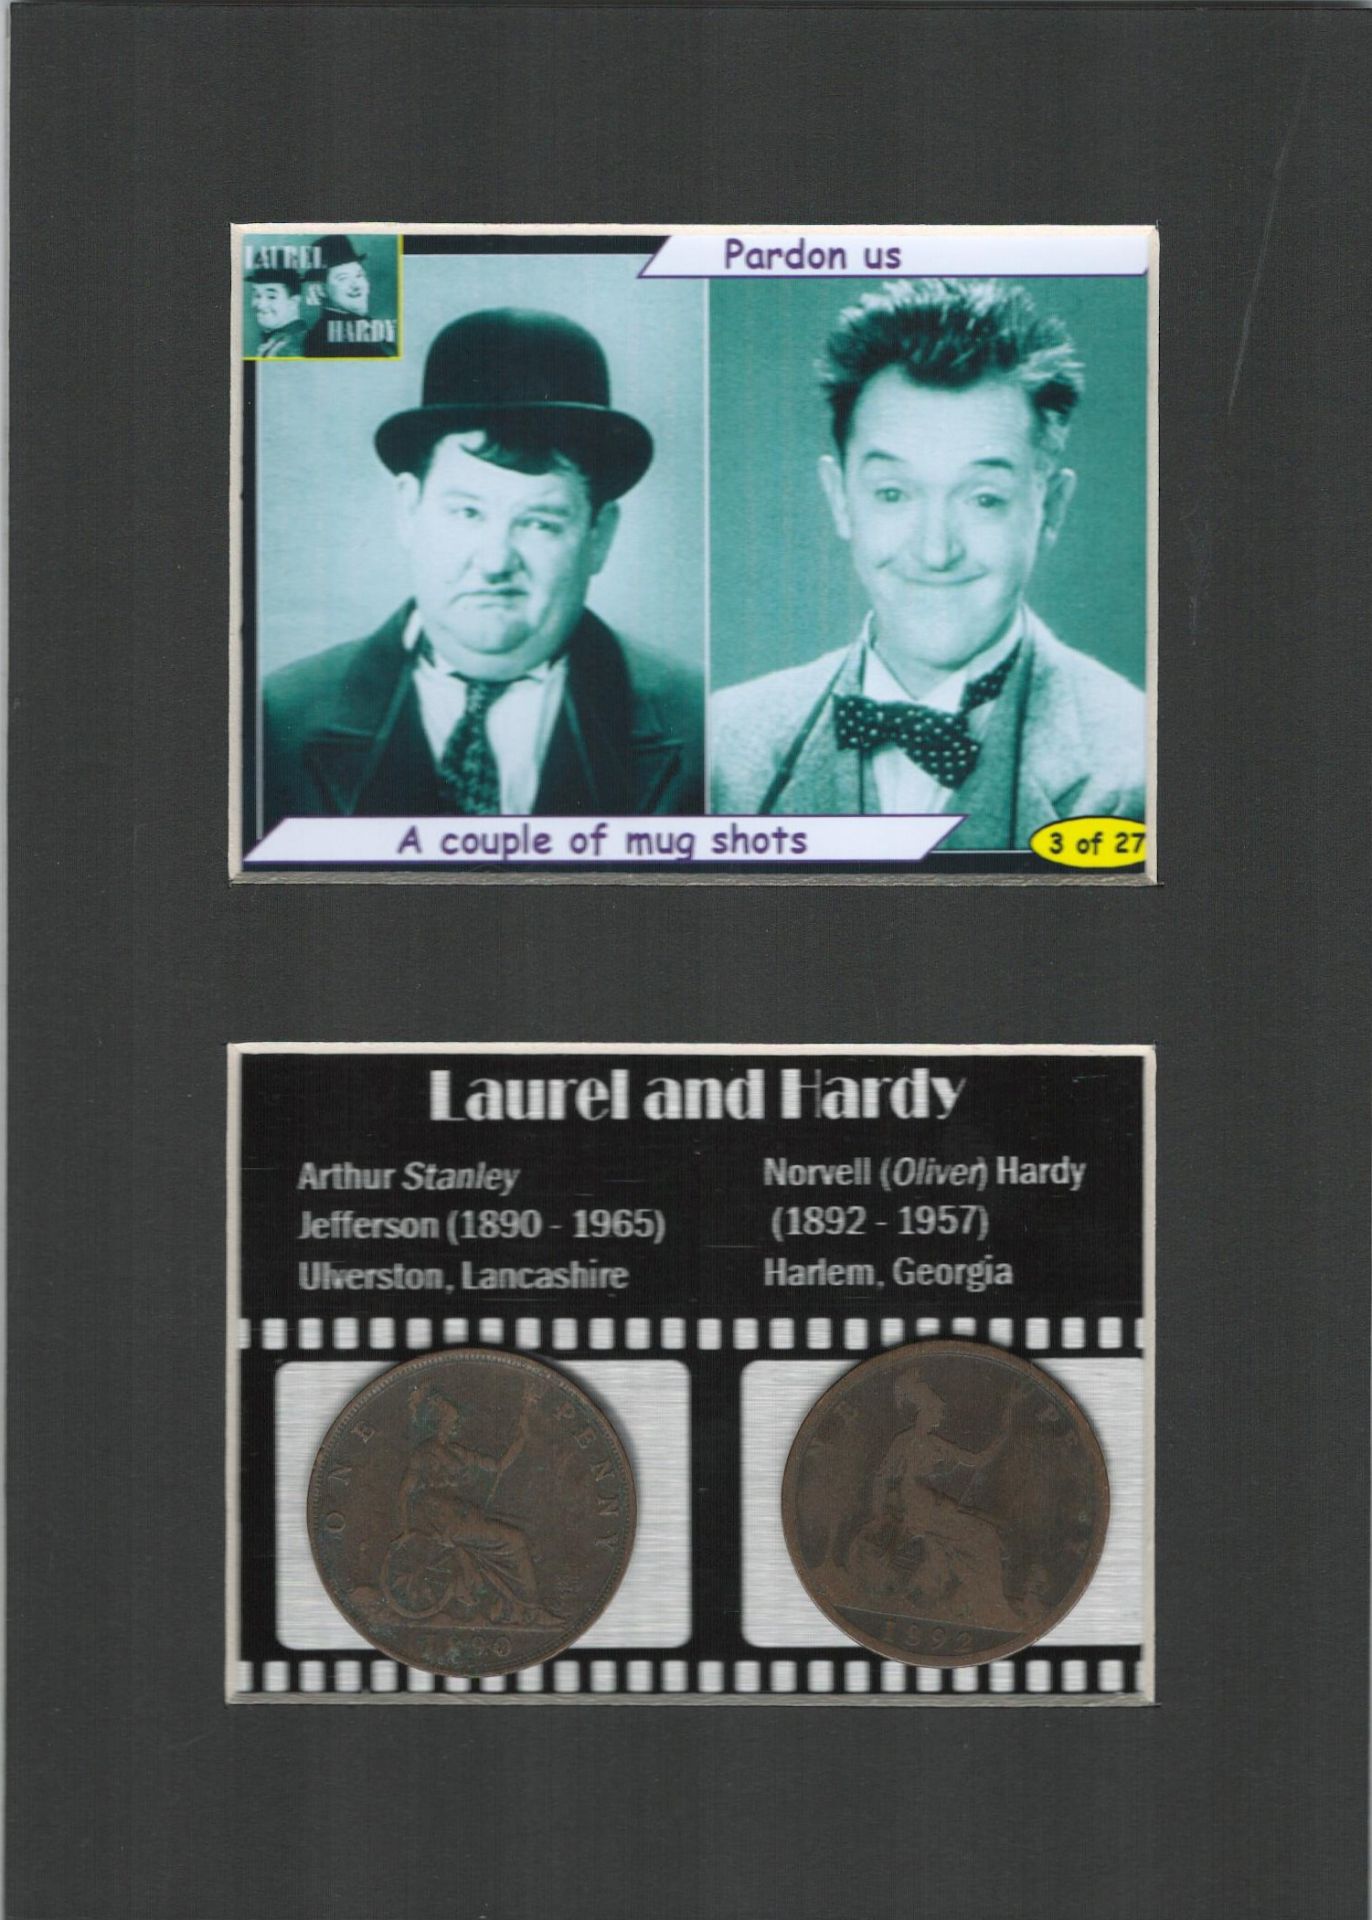 Laurel & Hardy Hollywood Legends Mounted Card & Coin Display Gift Set.